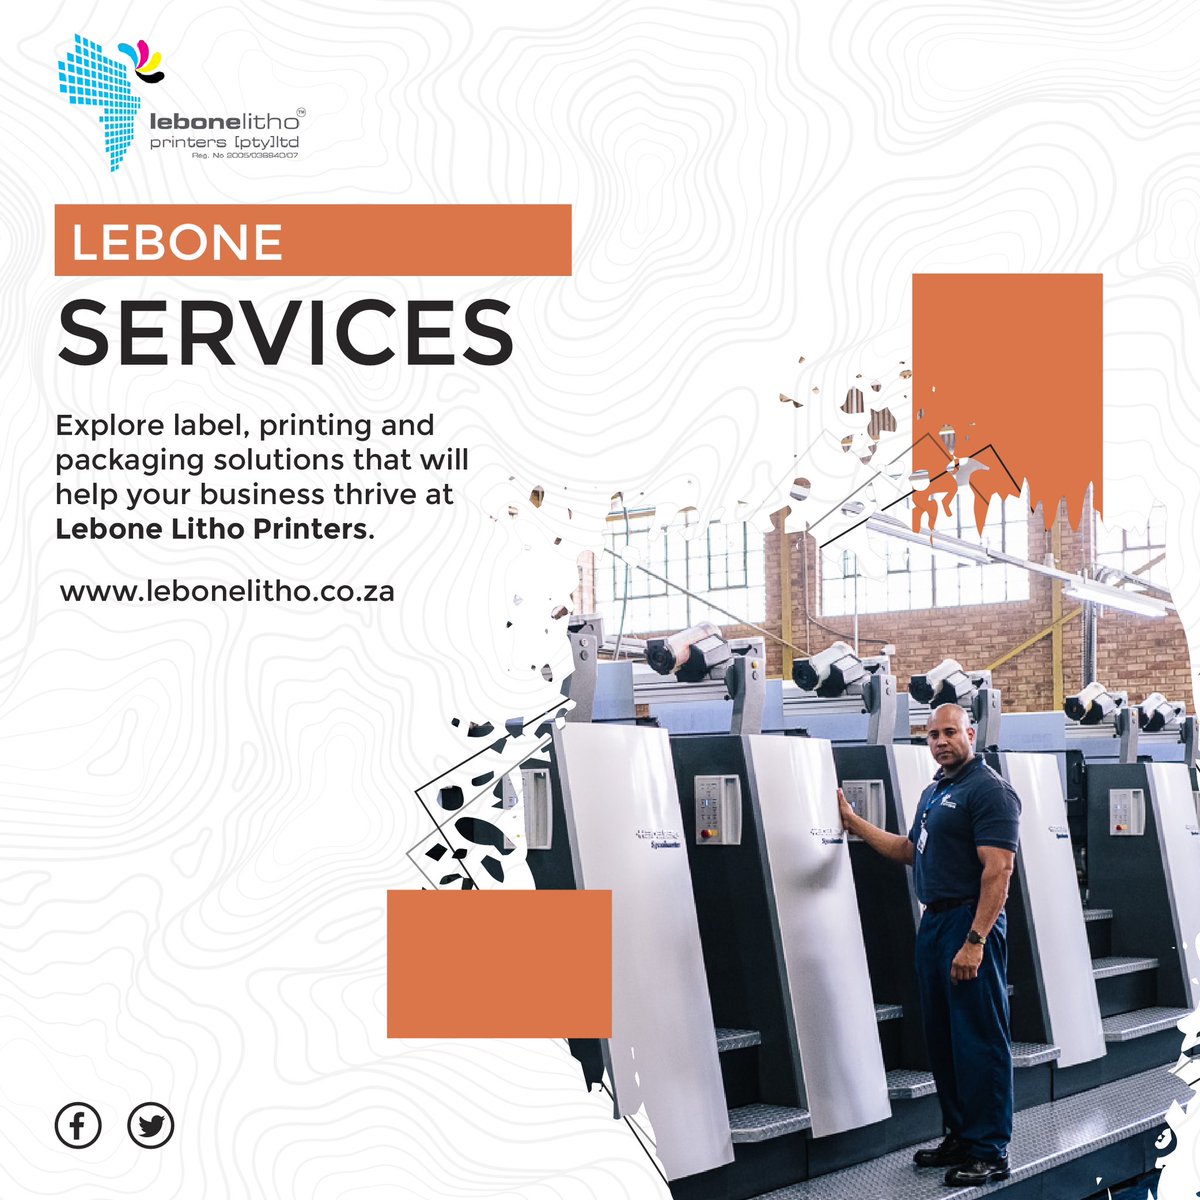 At Lebone Litho, we have a wide variety of services to suit your personal or business interests from packaging to web press printing. Contact us today. 
#lebonelitho #printingservices #printingsolutions #printindustry